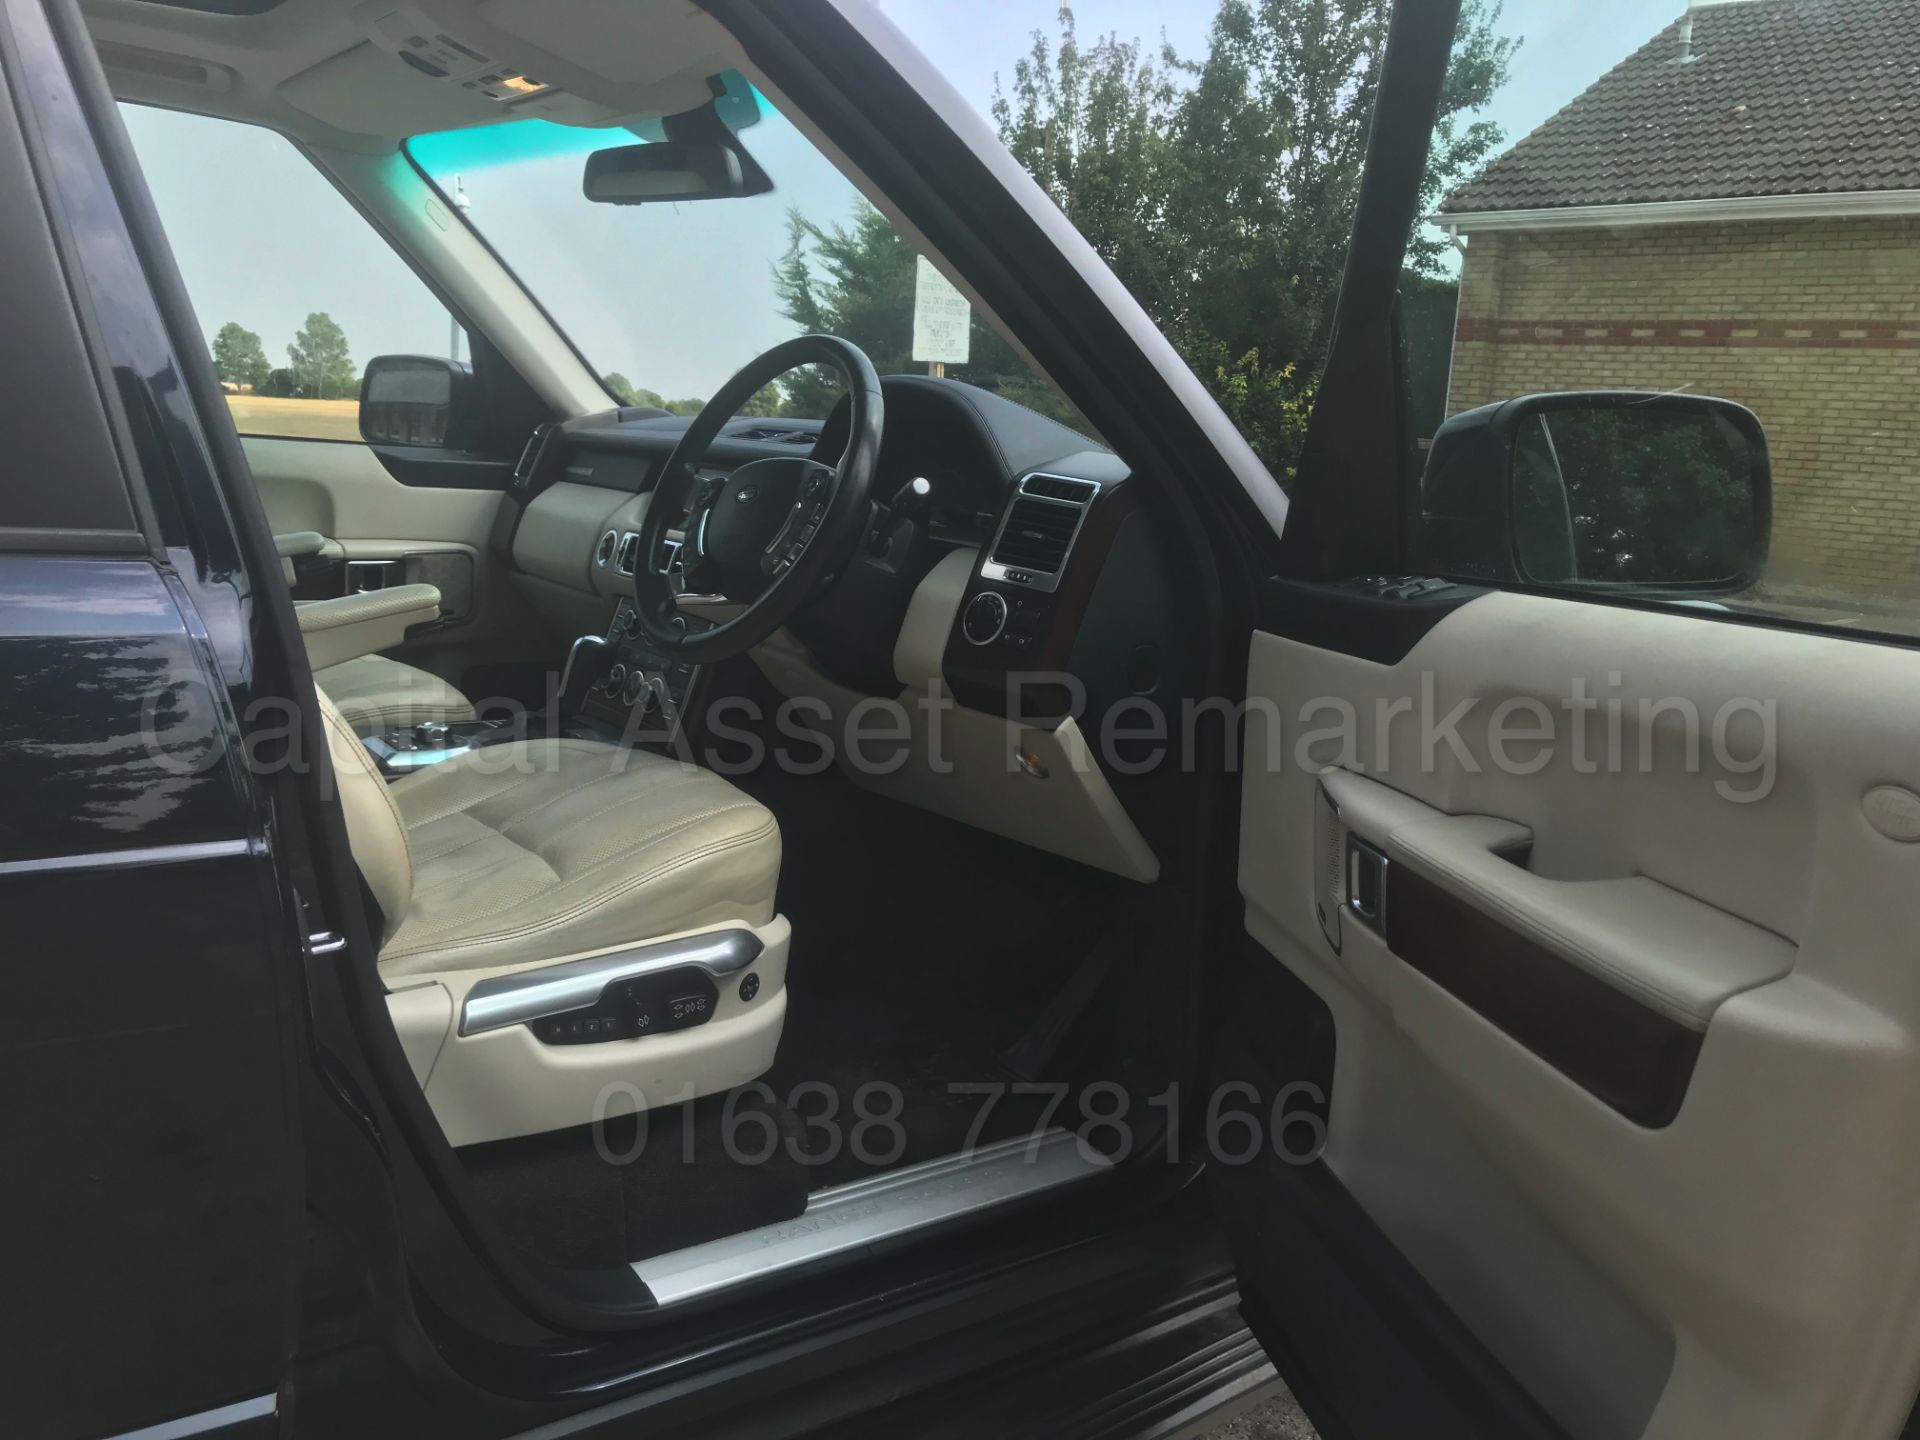 (On Sale) RANGE ROVER VOGUE **SE EDITION** (2010 - FACELIFT EDITION) 'TDV8 - 268 BHP - AUTO' **WOW** - Image 41 of 62